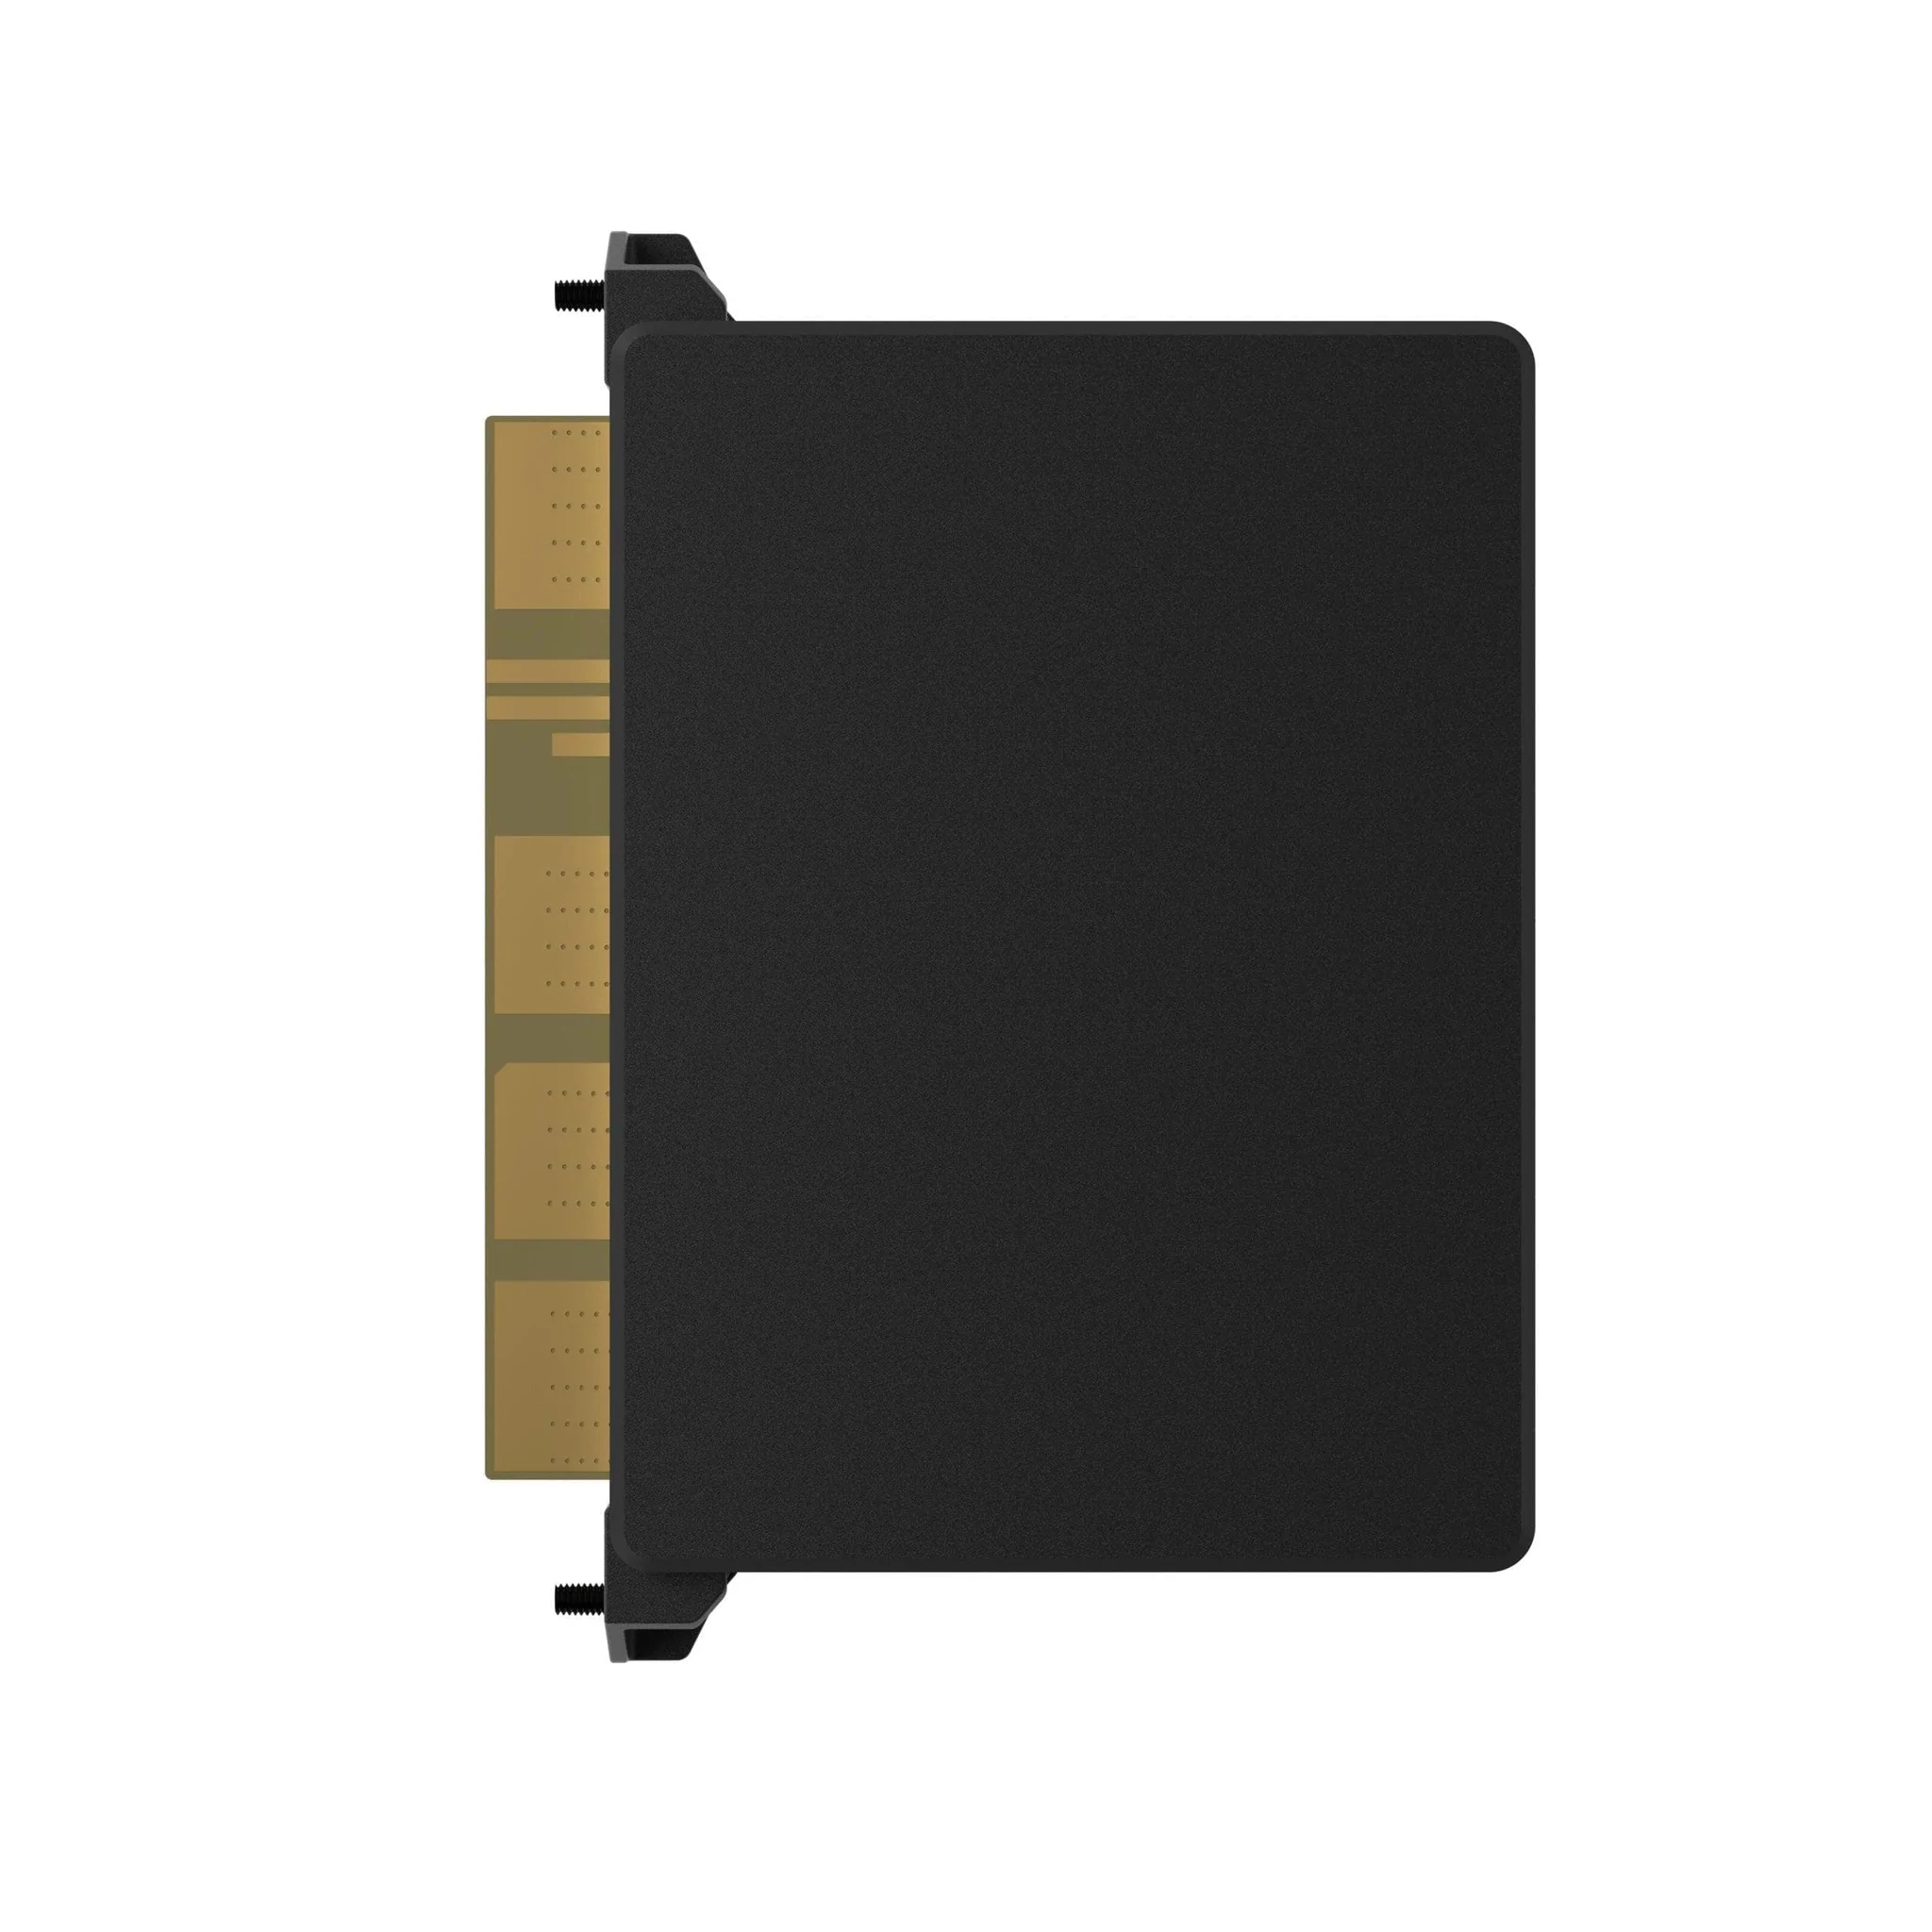 A black sd card on a white background, SHIPS IN 1-2 WEEKS.